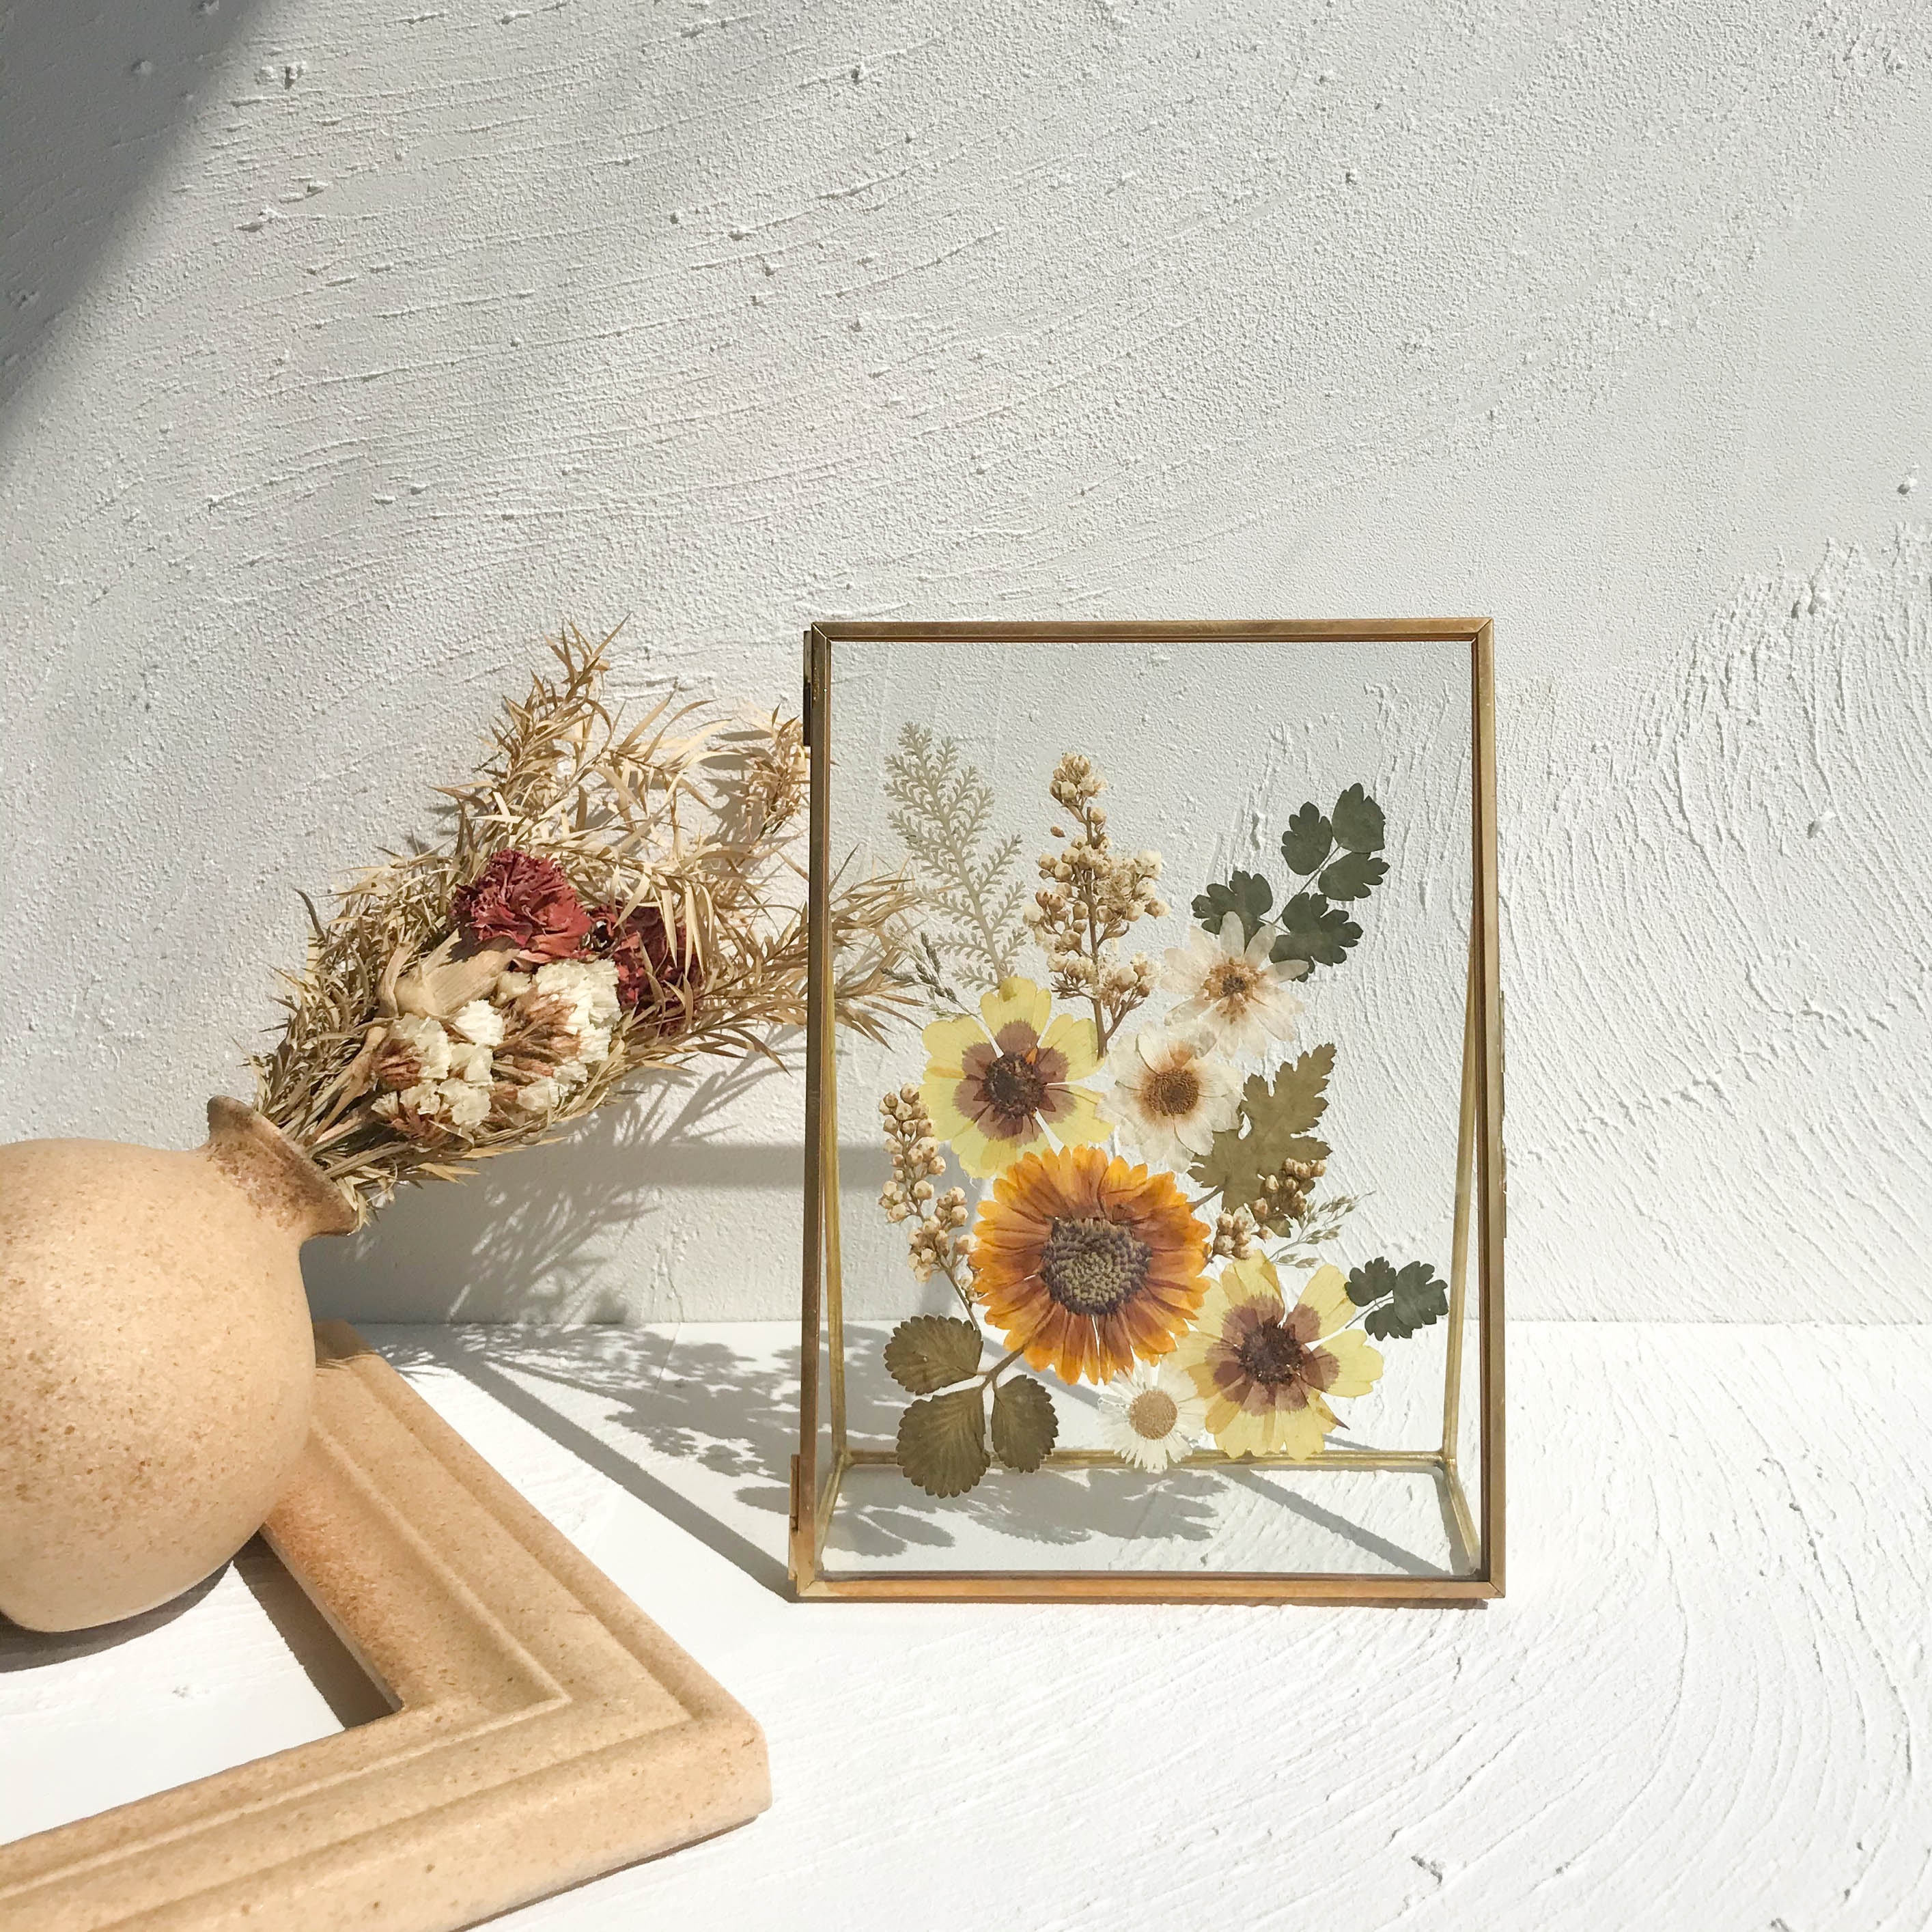 DIY Pressed Flower Frame — Cool Mom and Collected